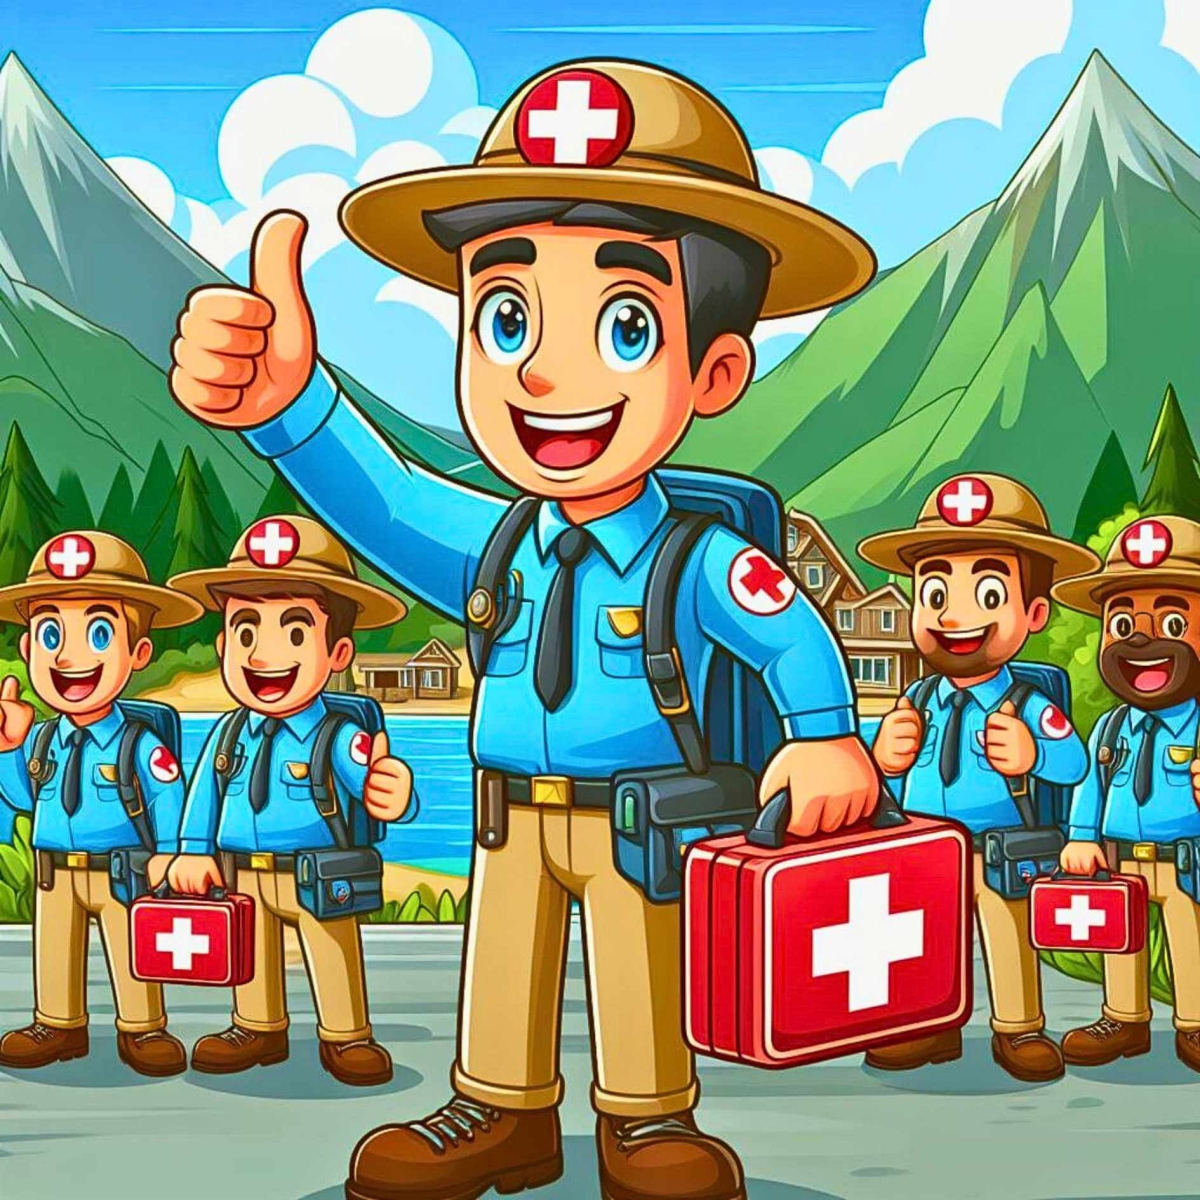 The experienced tour guides are always equipped with first aid kits and maps highlighting medical facilities, ready to ensure the safety and well-being of their tour groups, especially if there are any children.